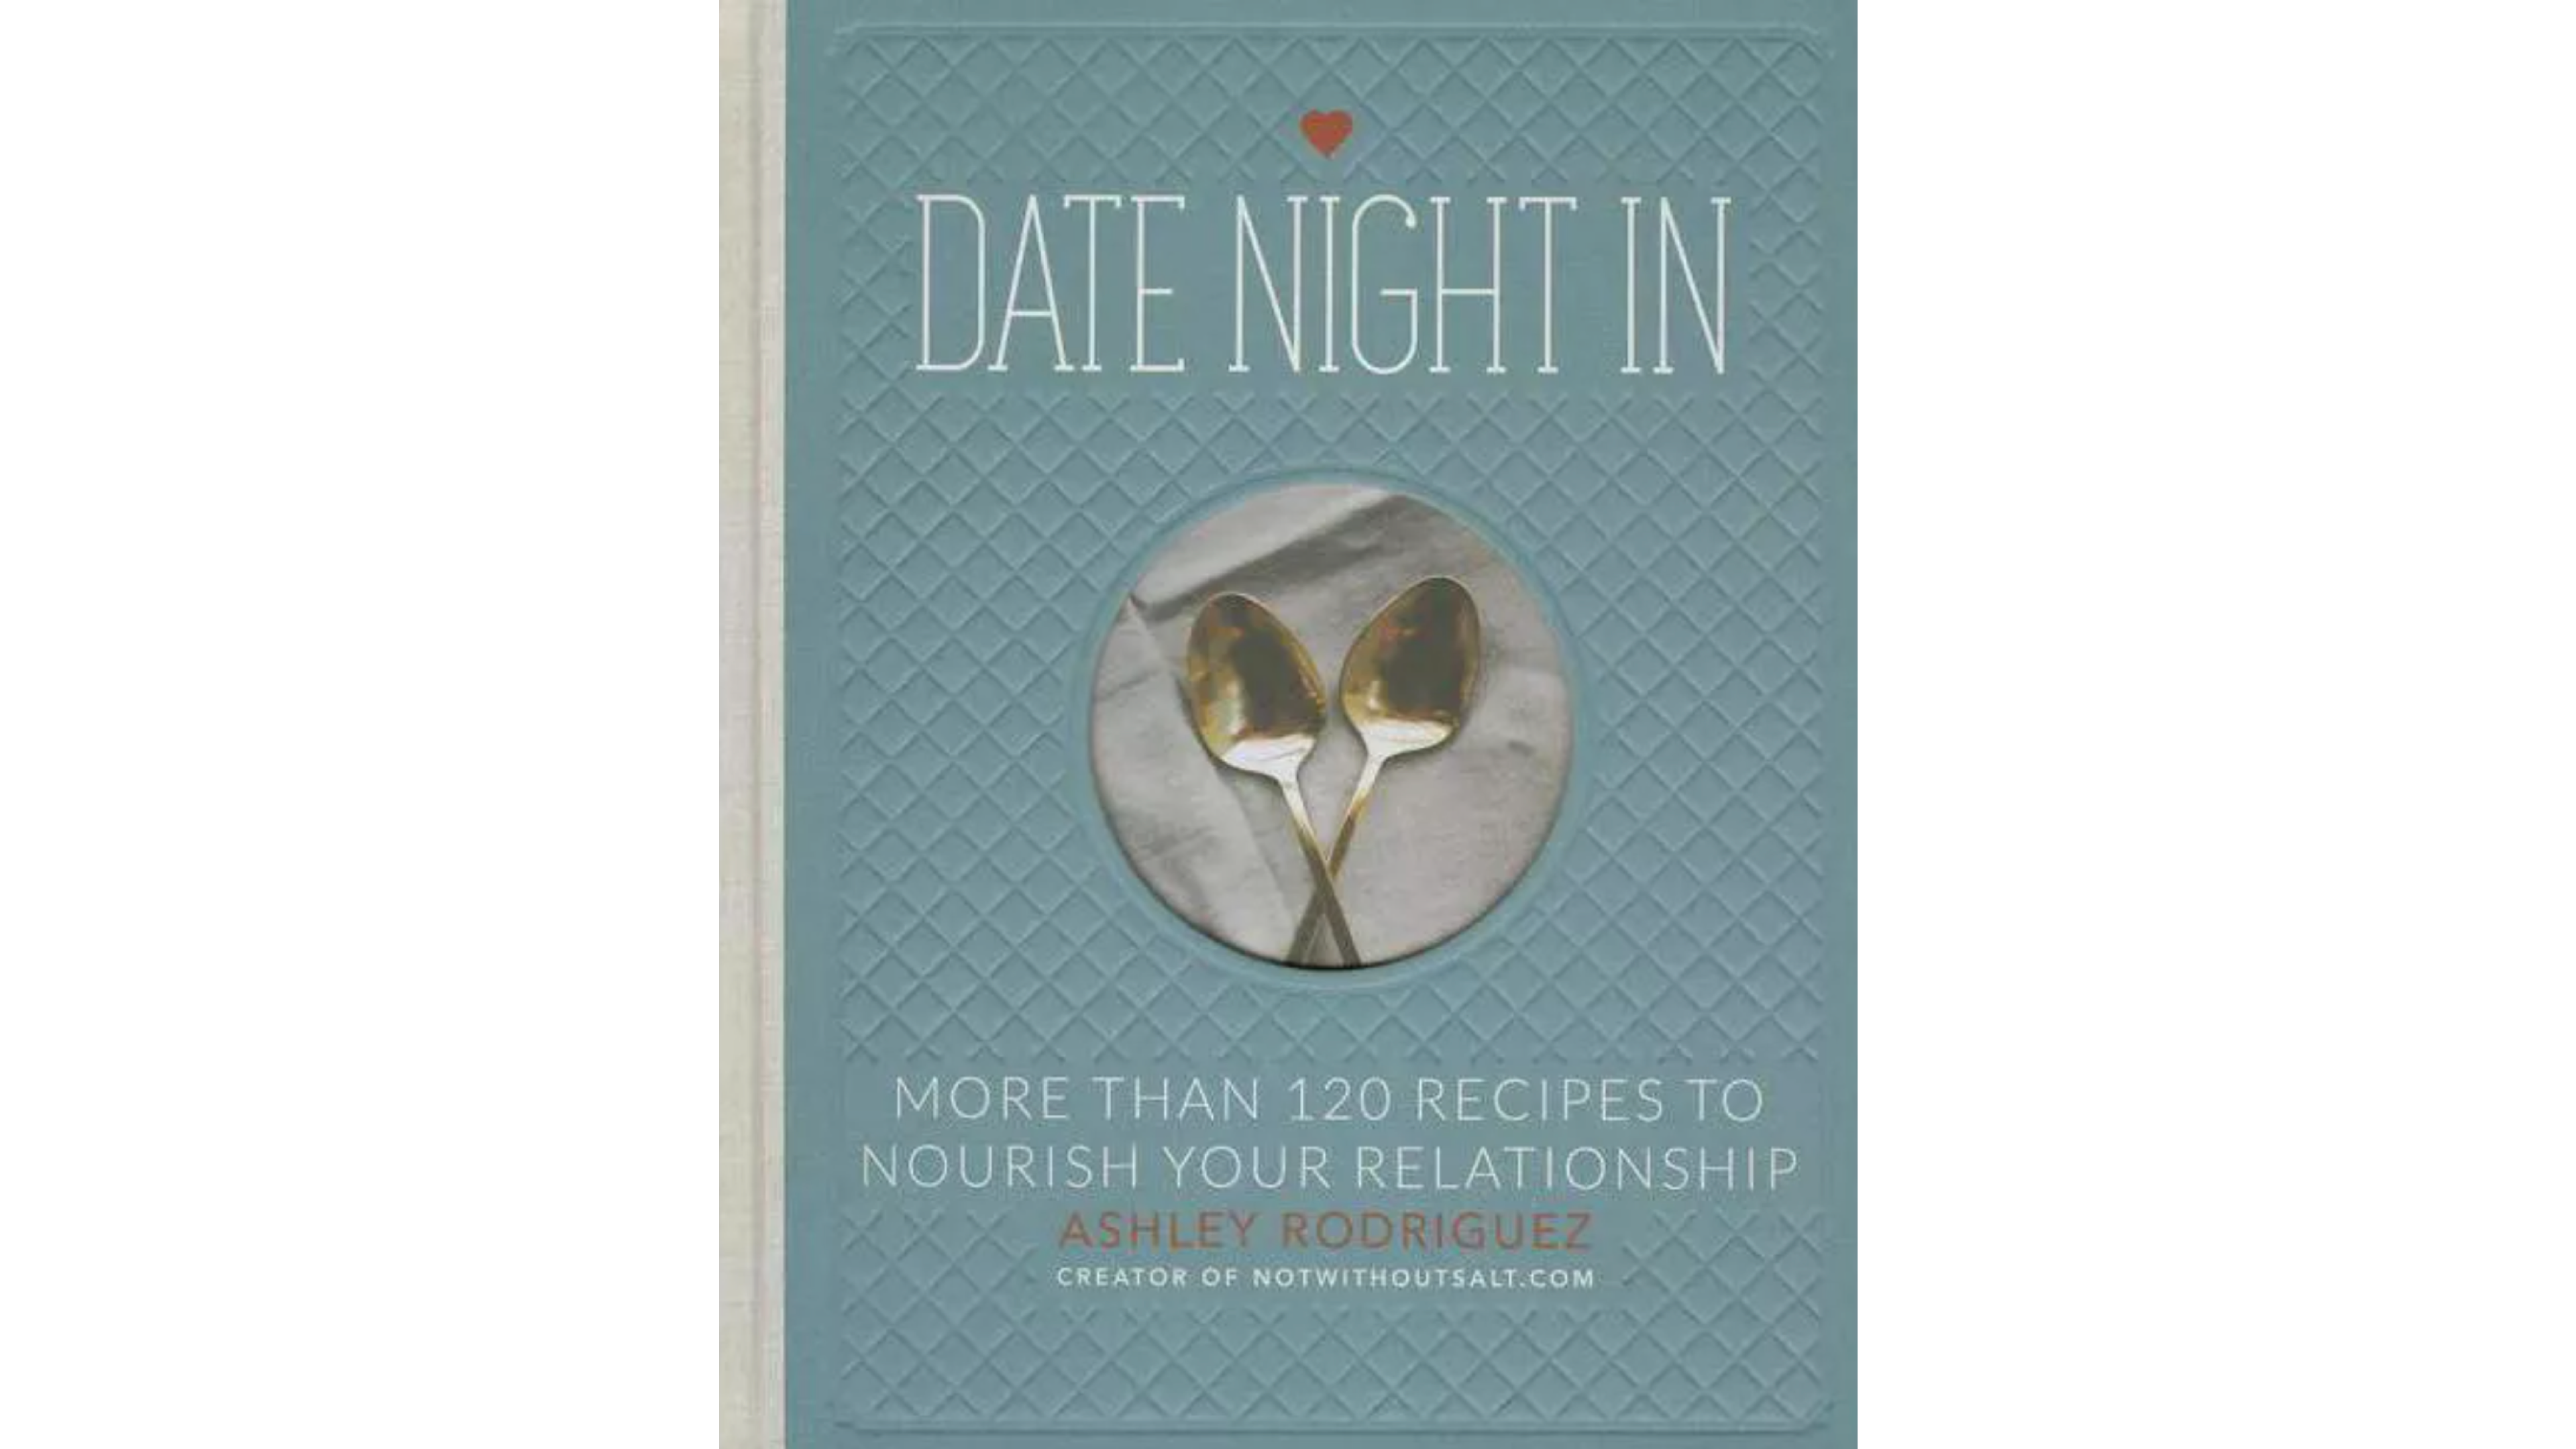 date night cookbook filled with recipes for the two of you to try together